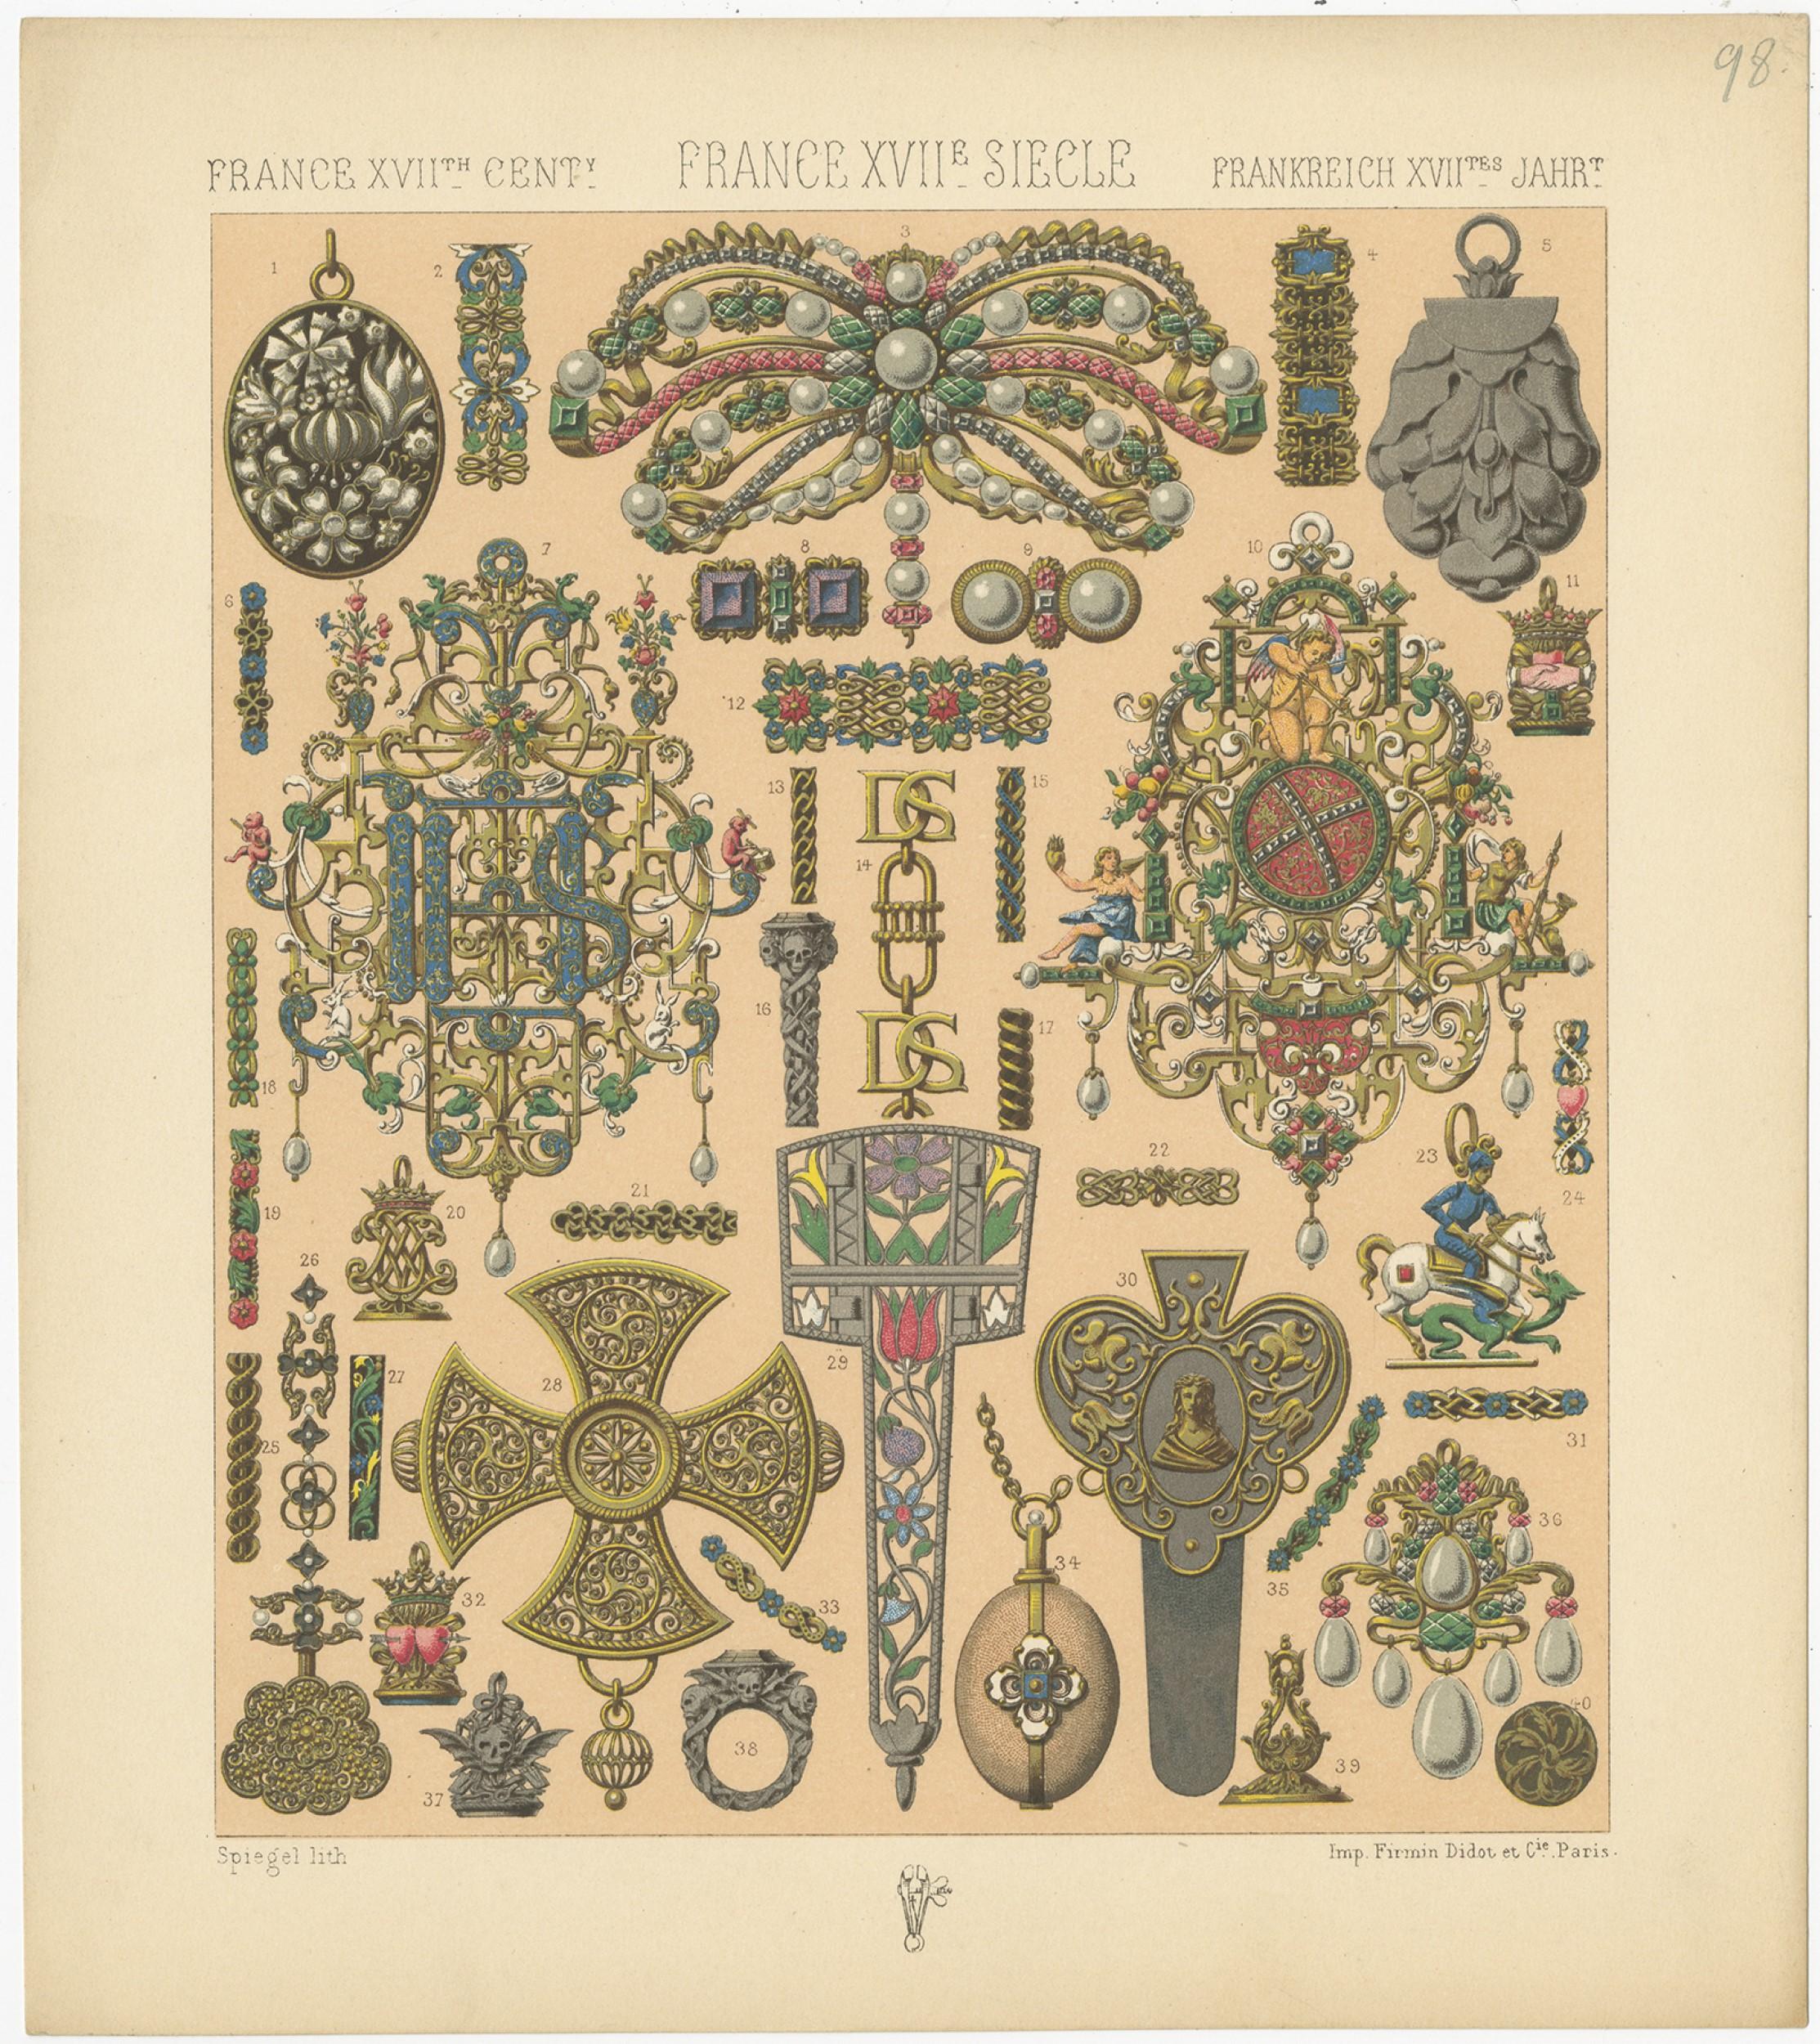 Antique print titled 'France XVIIth Cent - France XVIIe Siecle - Frankreich XVIItes Jahr'. Chromolithograph of French 17th century decorative objects. This print originates from 'Le Costume Historique' by M.A. Racinet. Published, circa 1880.